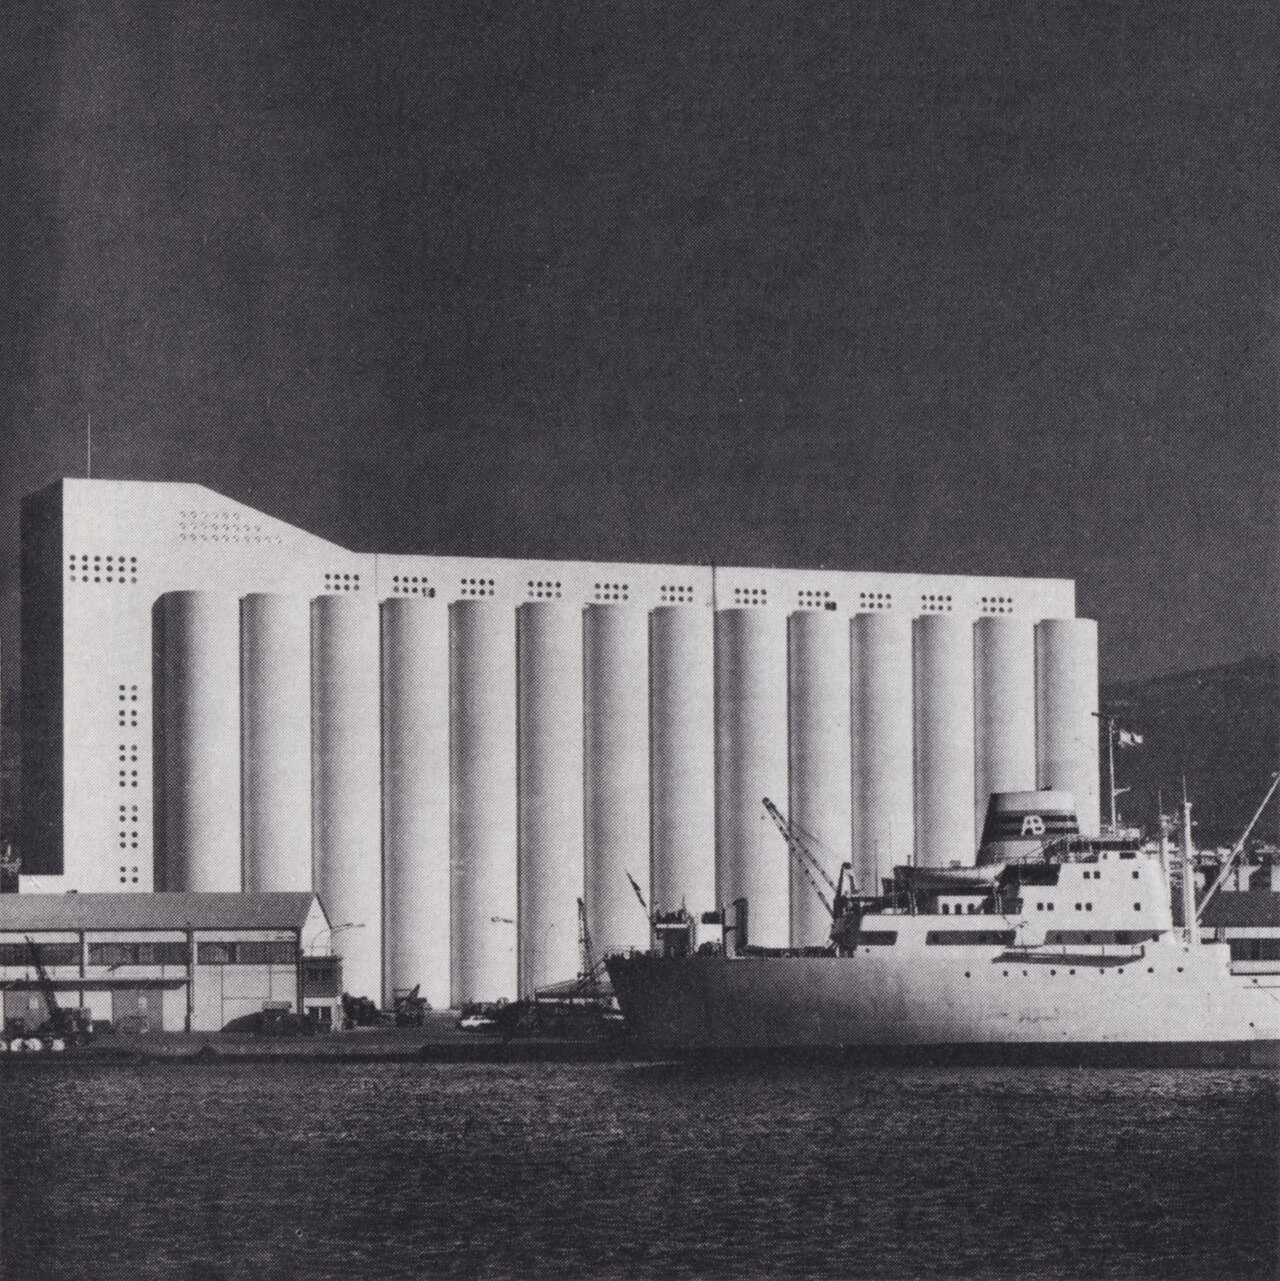 A black and white image of the Beirut grain silos which consist of a white concrete building with 14 cylinder shapes. The sea and a boat can be seen in the foreground.